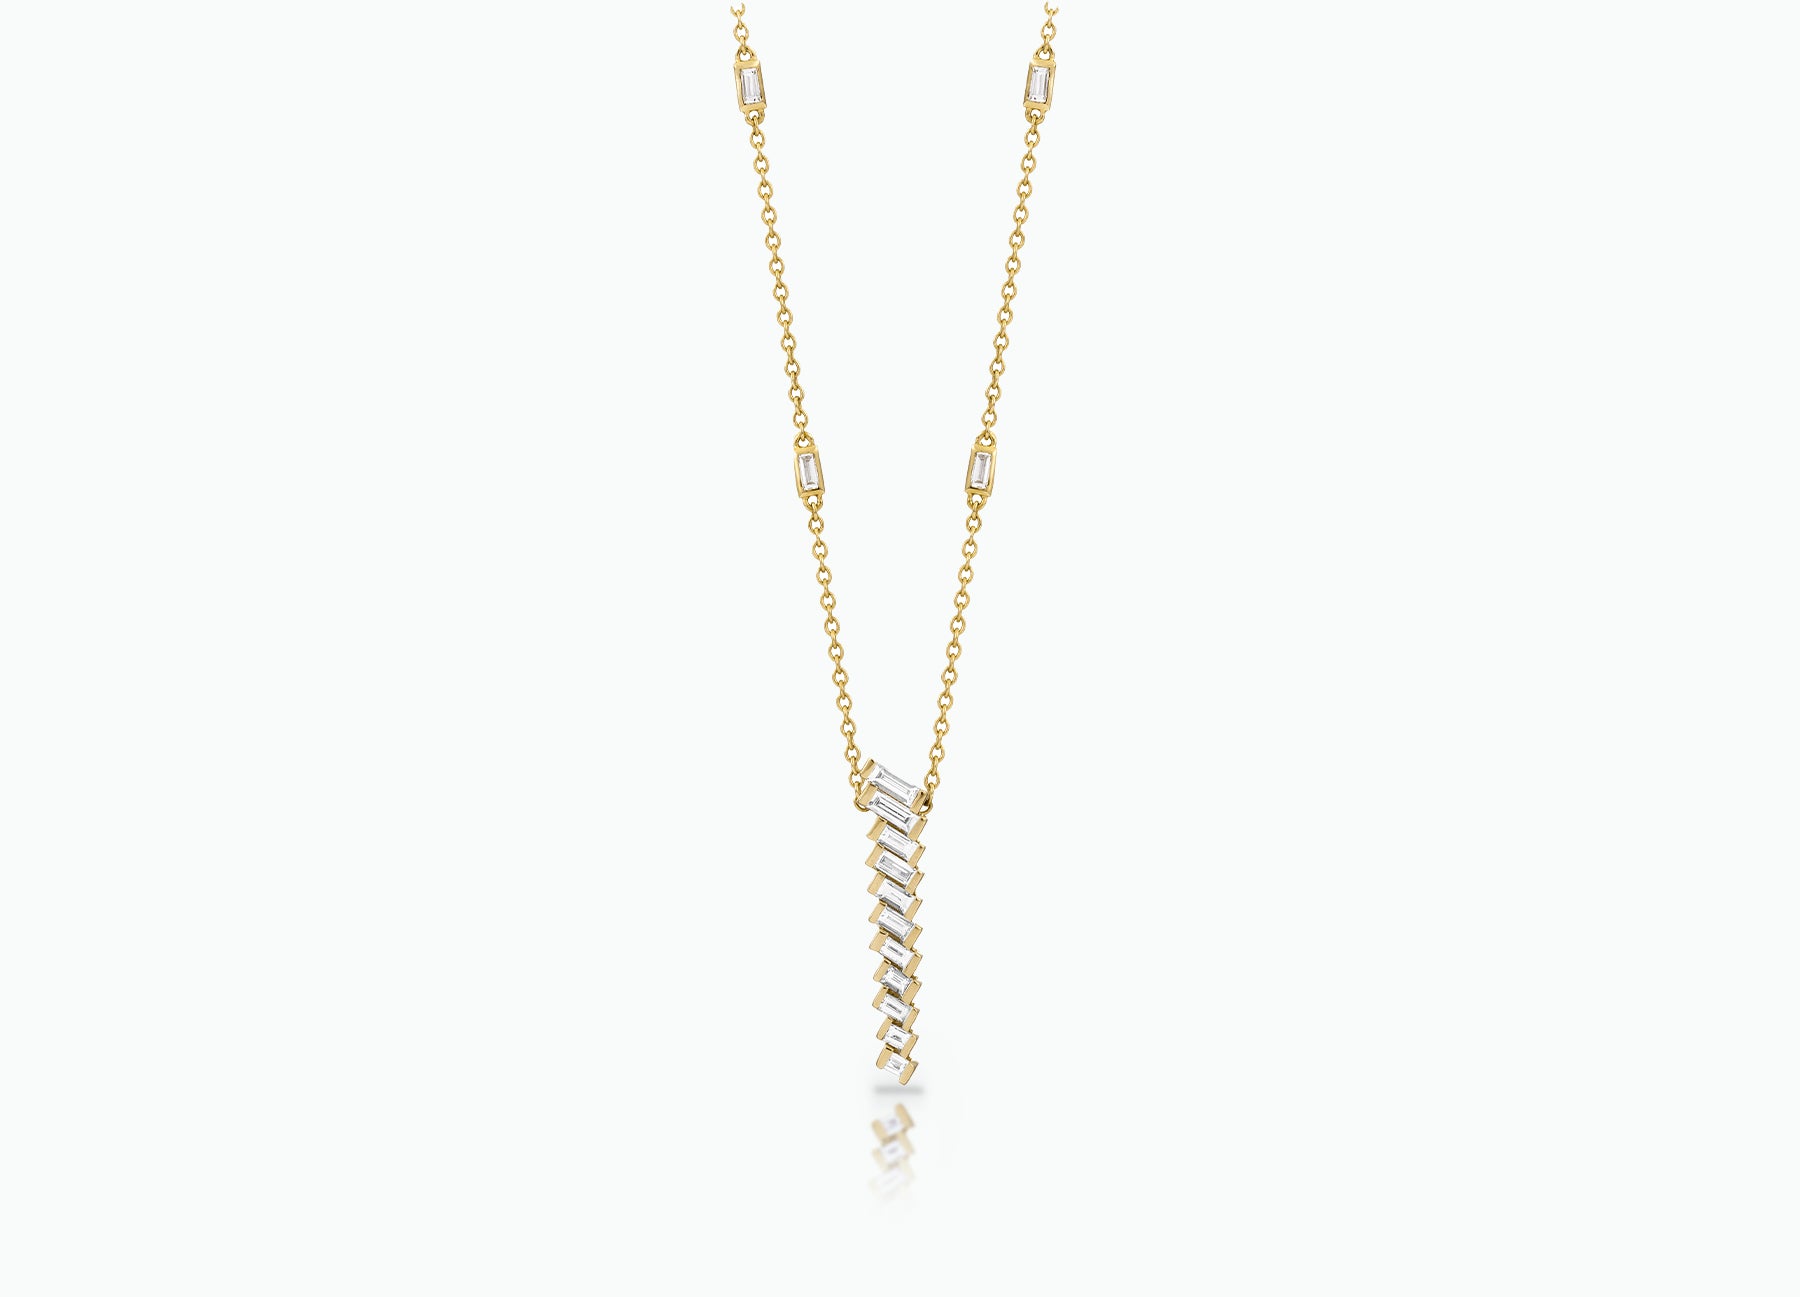 Pendant with baguette white Diamonds that create a chevron pattern. Made from rose, yellow or white 18k Gold.